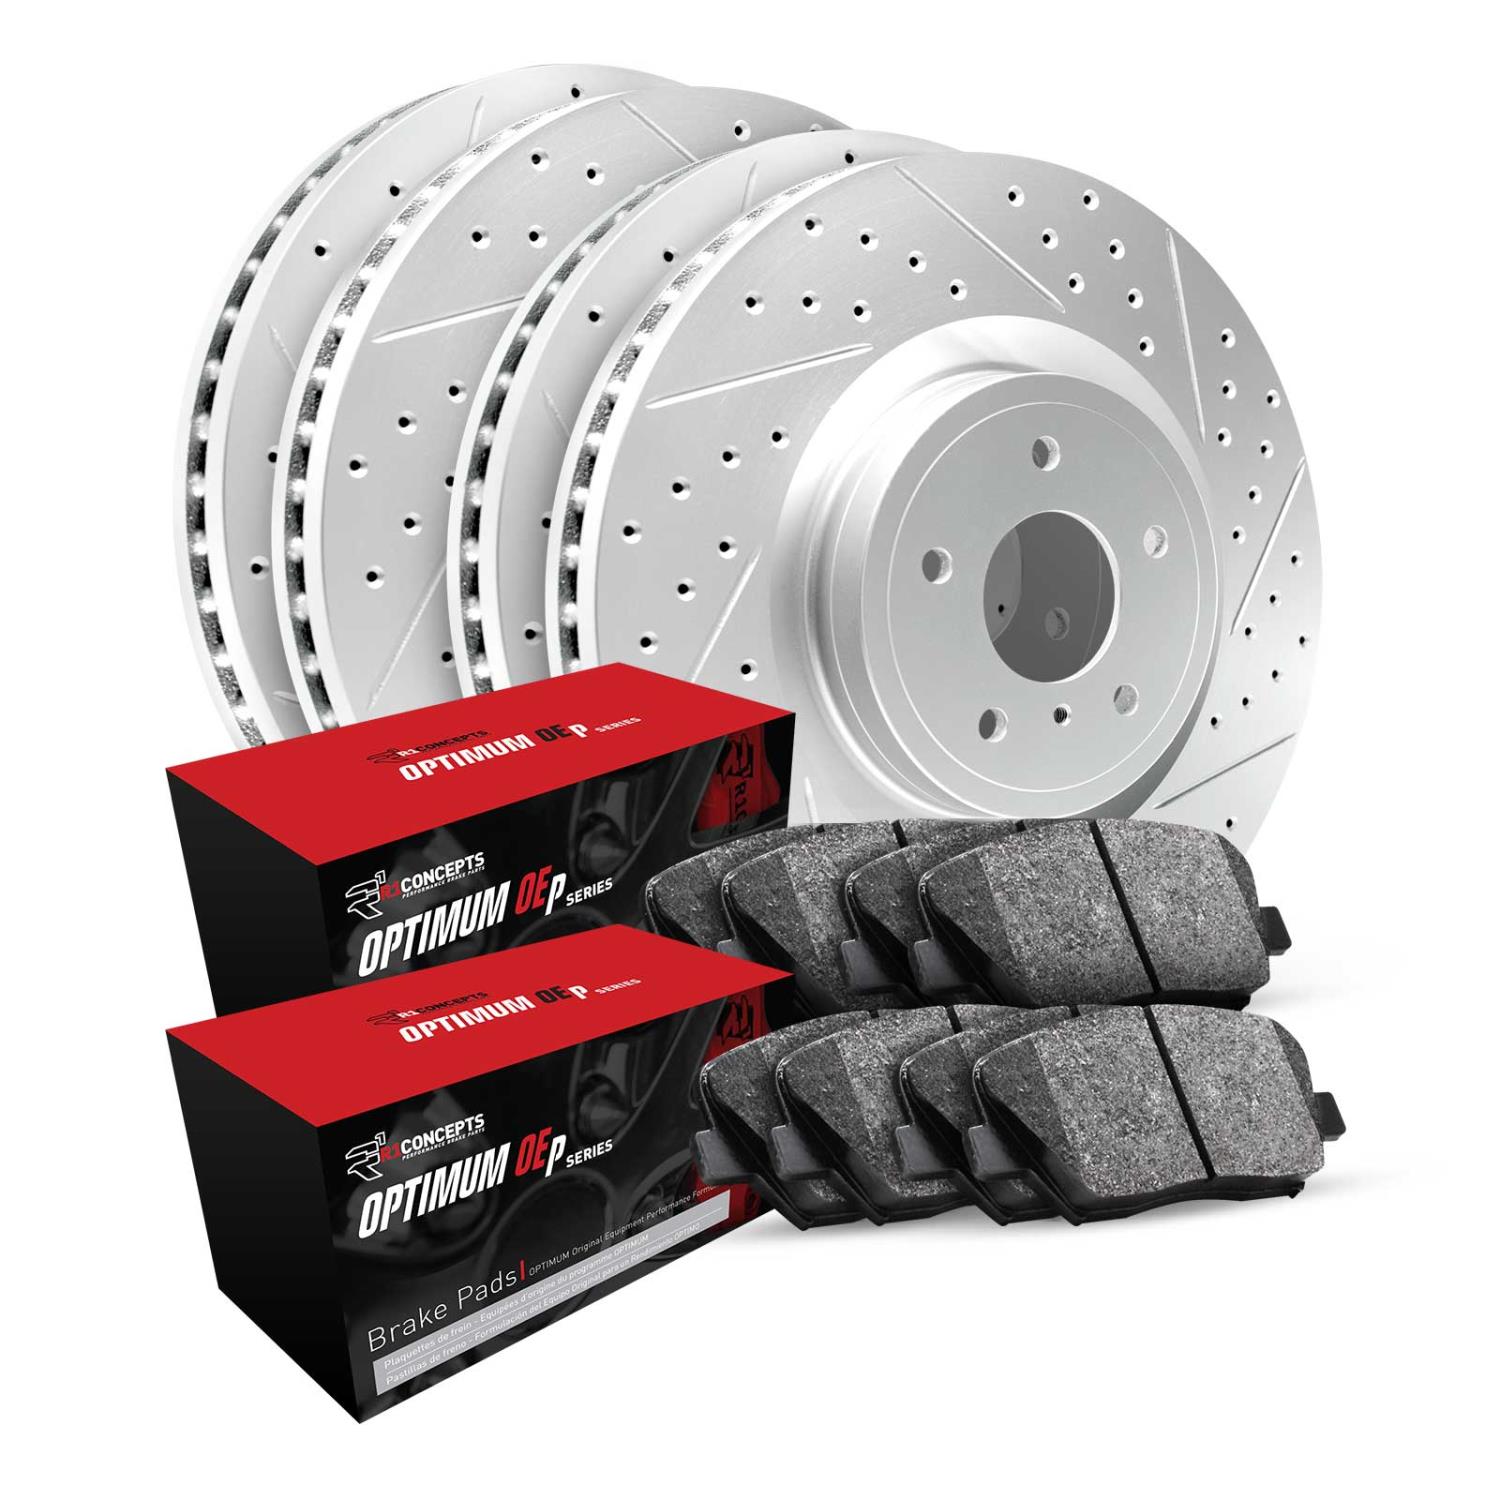 GEO-Carbon Brake Rotor Set w/Optimum OE Pads, Fits Select Mercedes-Benz, Position: Front & Rear